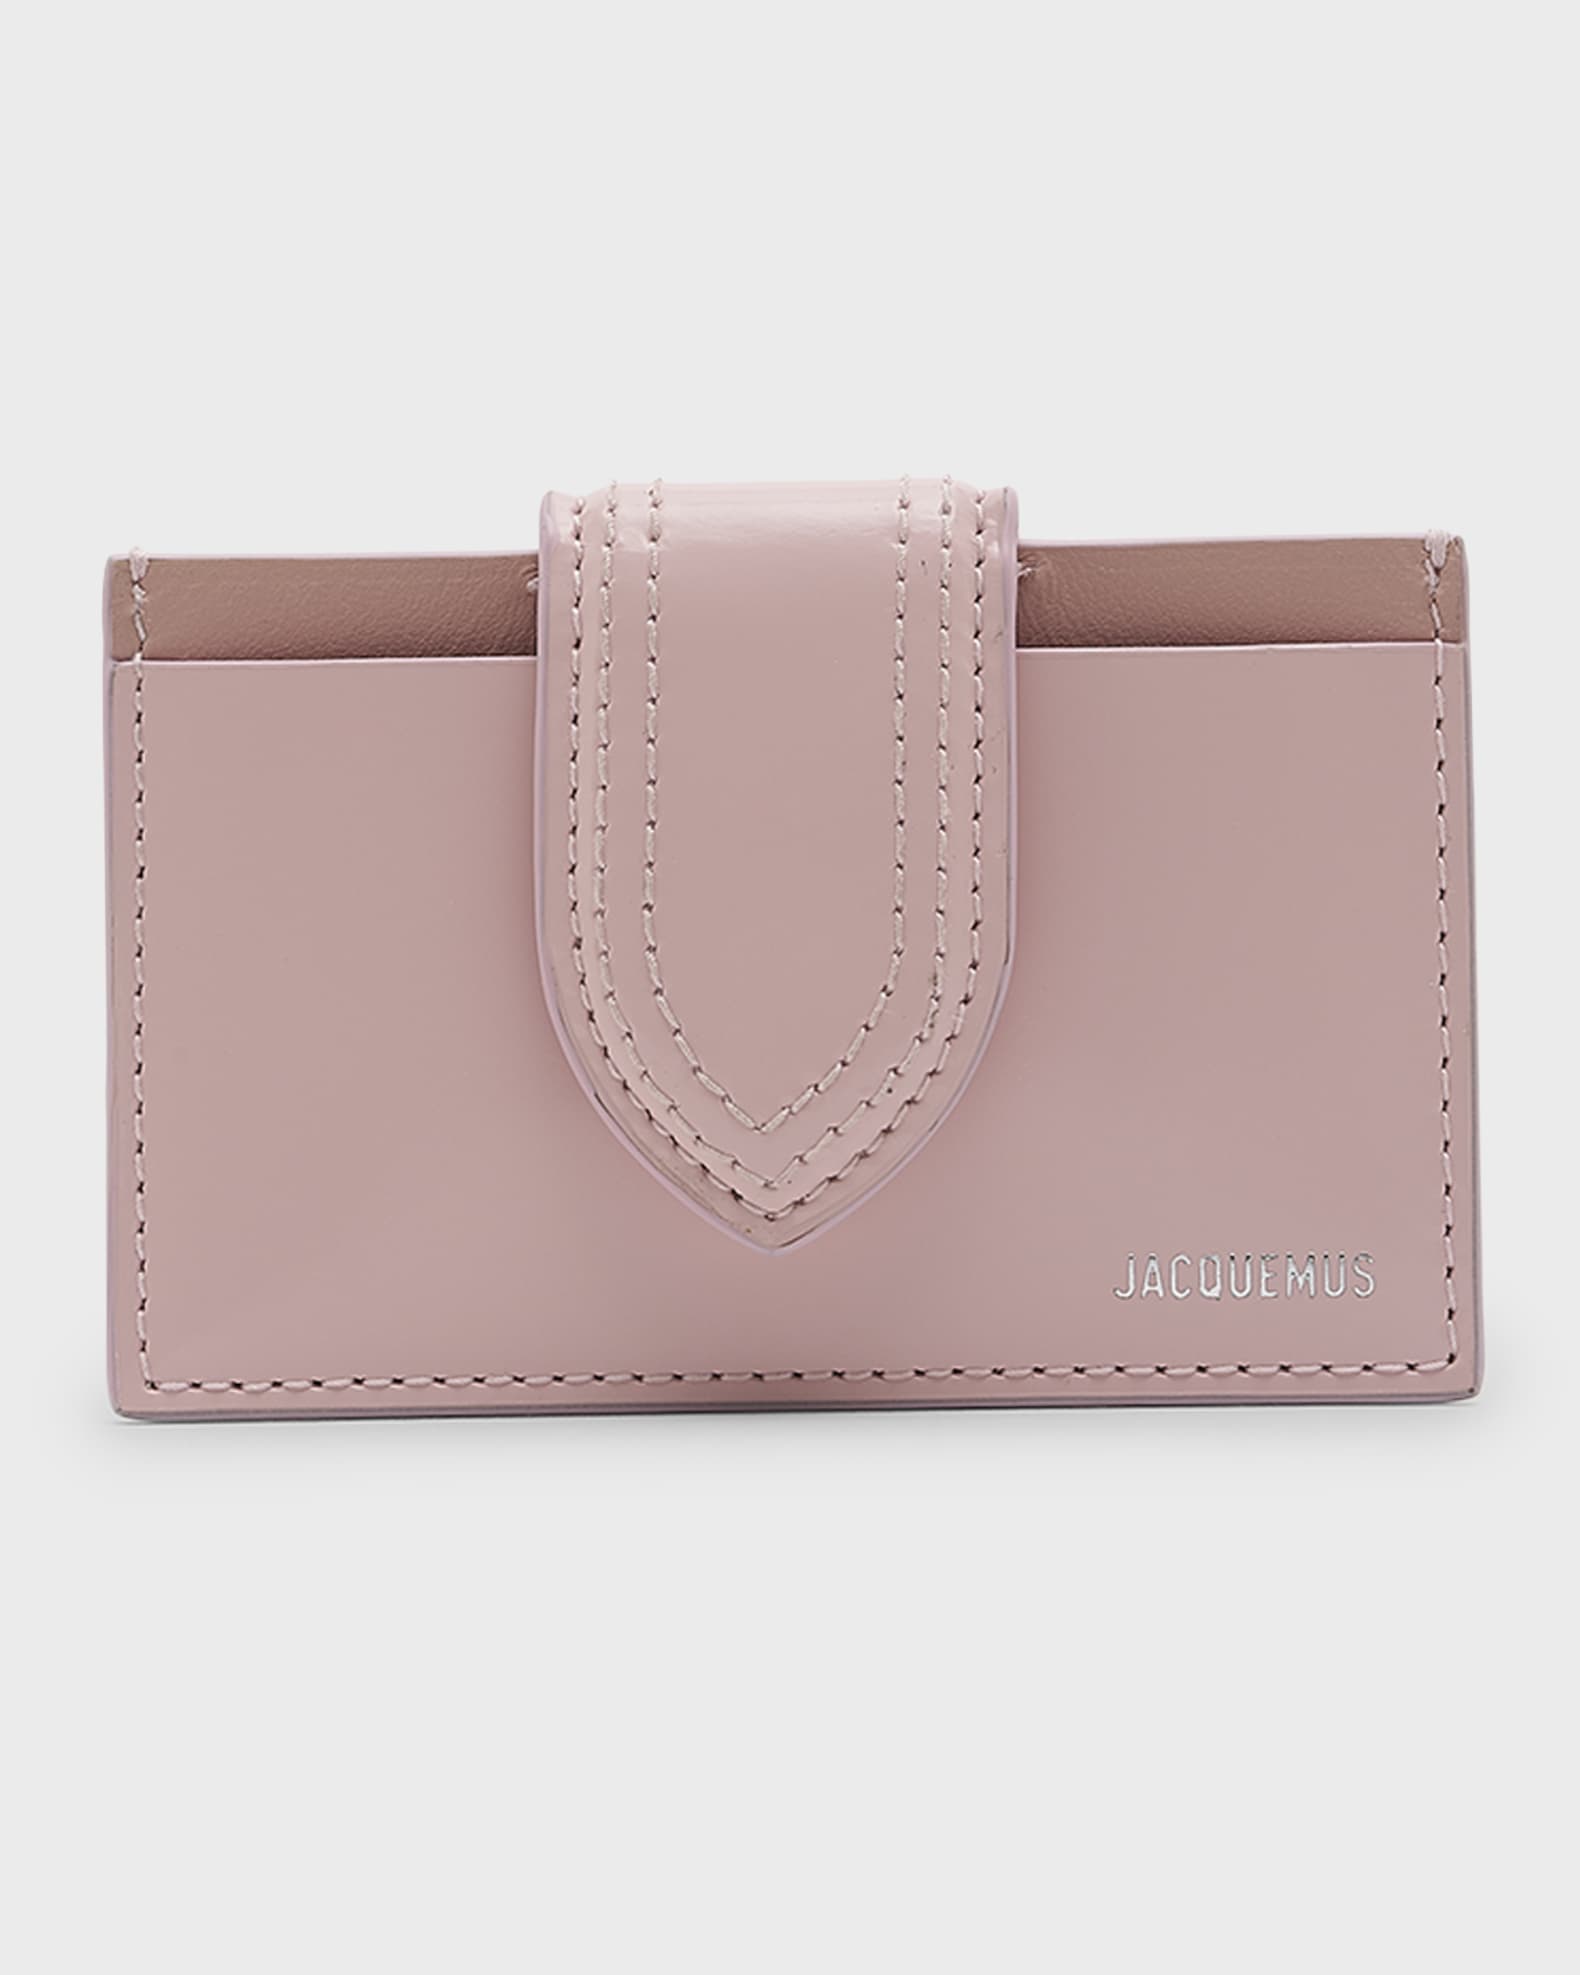 Jacquemus Card holder with strap, Men's Accessorie